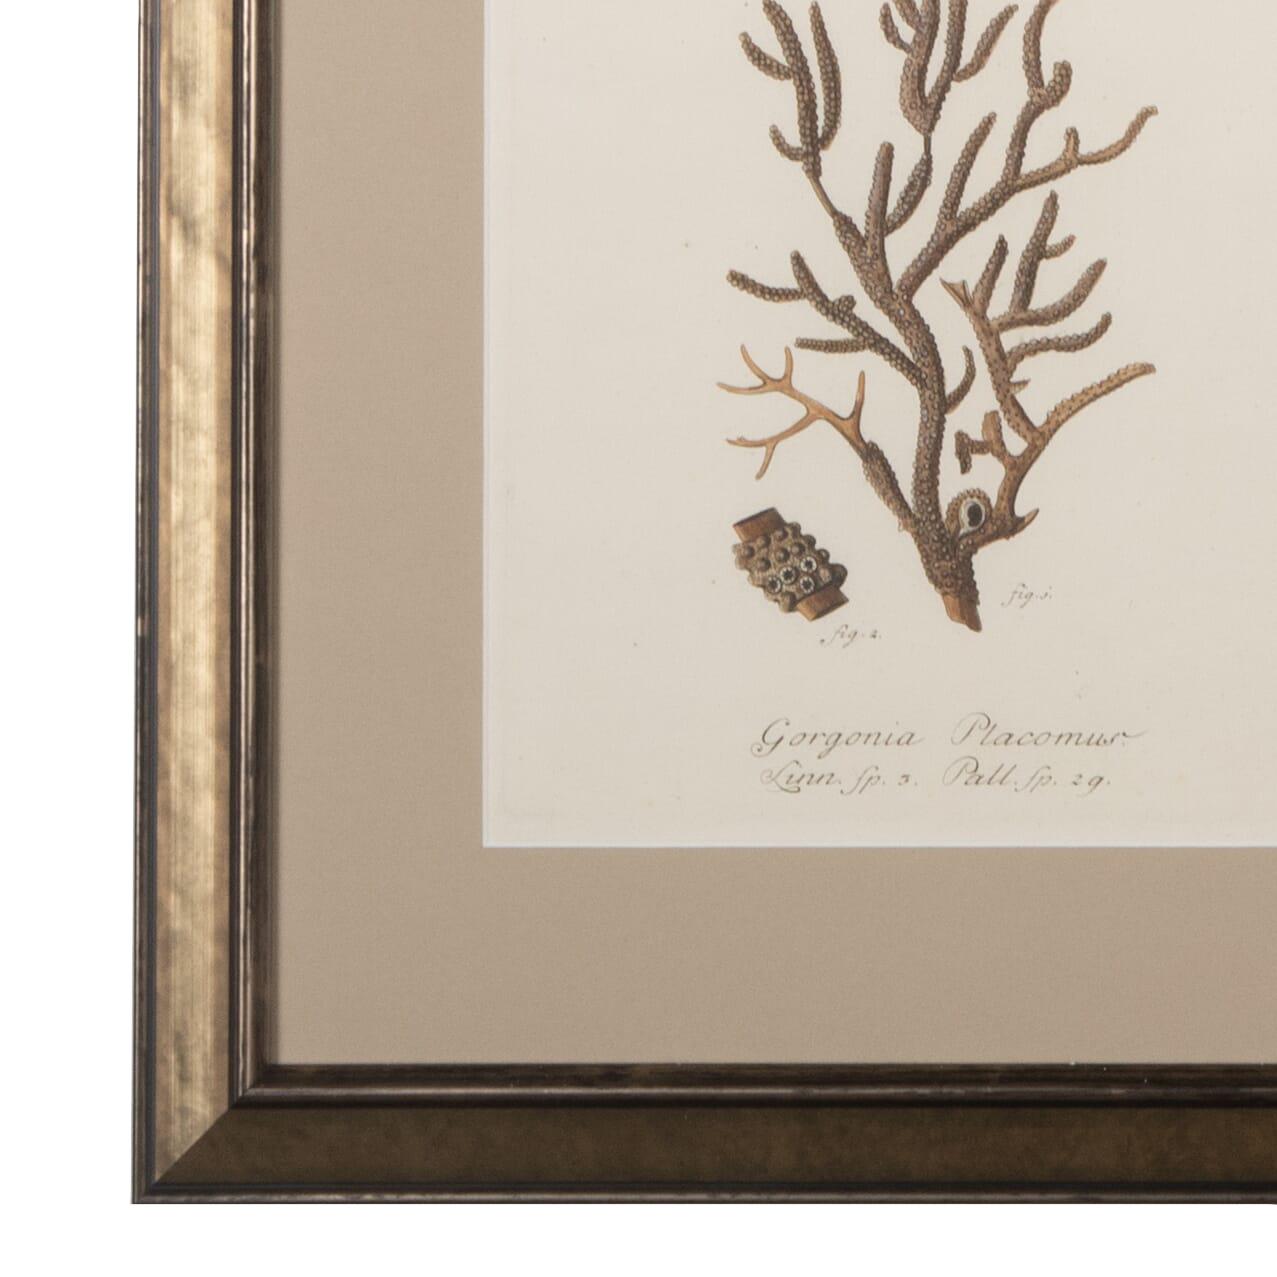 Collection of nine 18th Century coral engravings.
Mounted then framed in Italian wooden frames. 
Circa 1780.